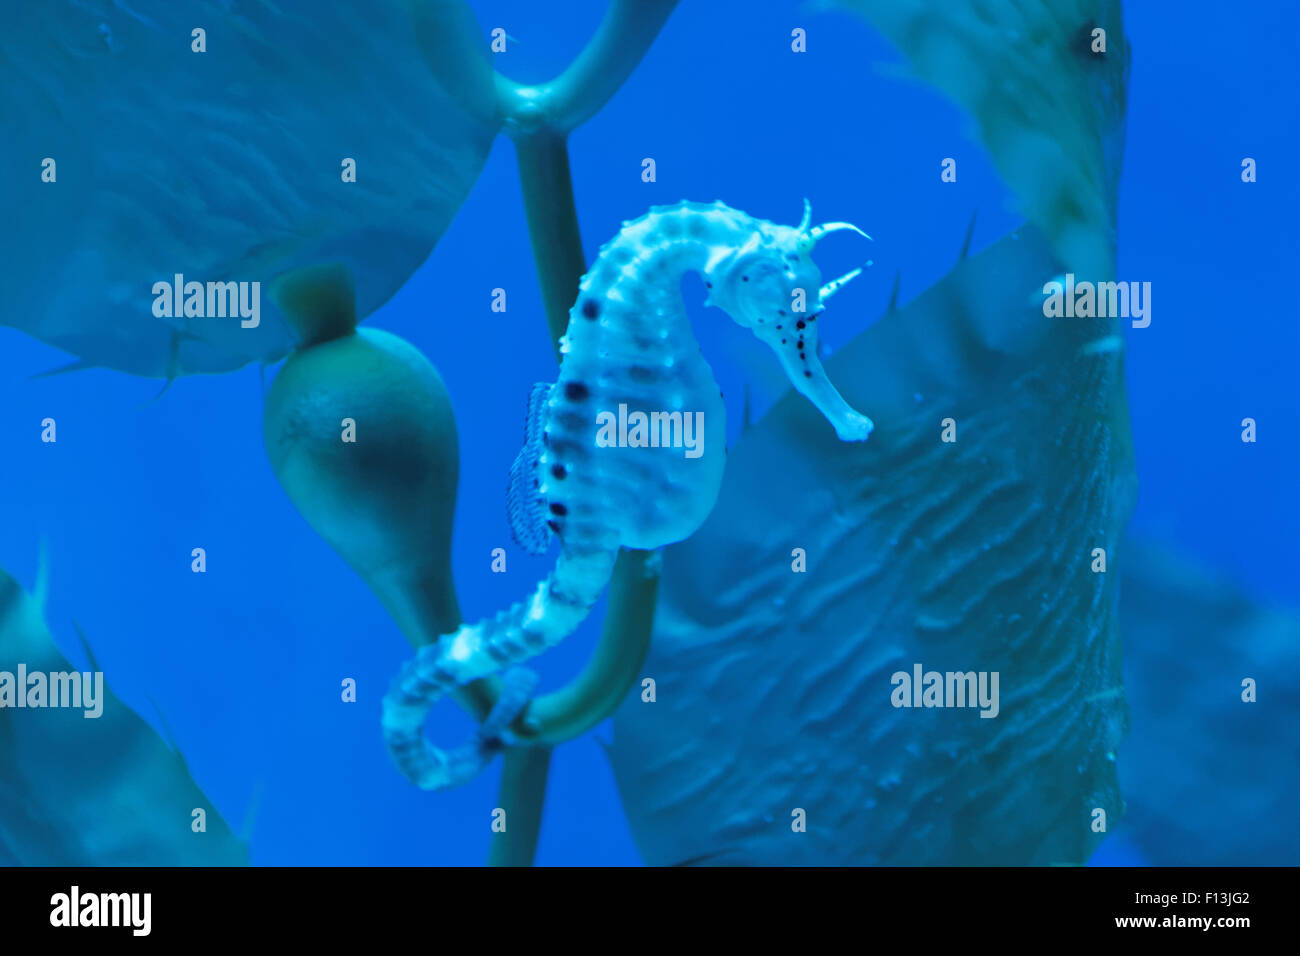 Big-belly seahorse or pot-bellied seahorse, Hippocampus abdominalis, is one of the largest seahorse species. Stock Photo